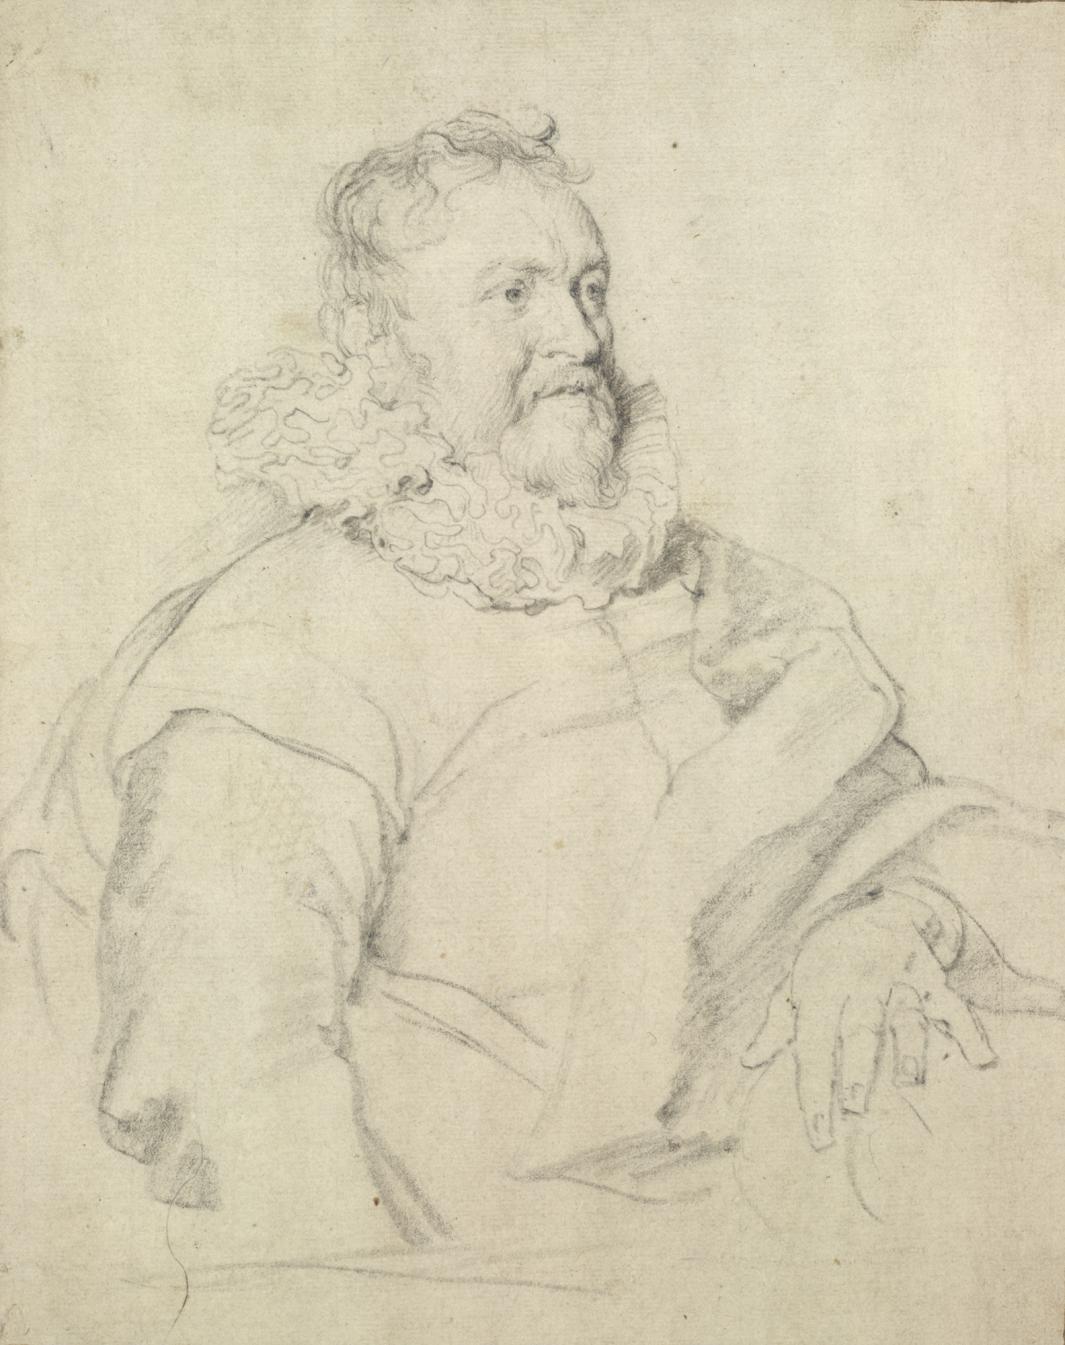 black chalk portrait drawing of man with lace collar, with hand on lap, circa 1628